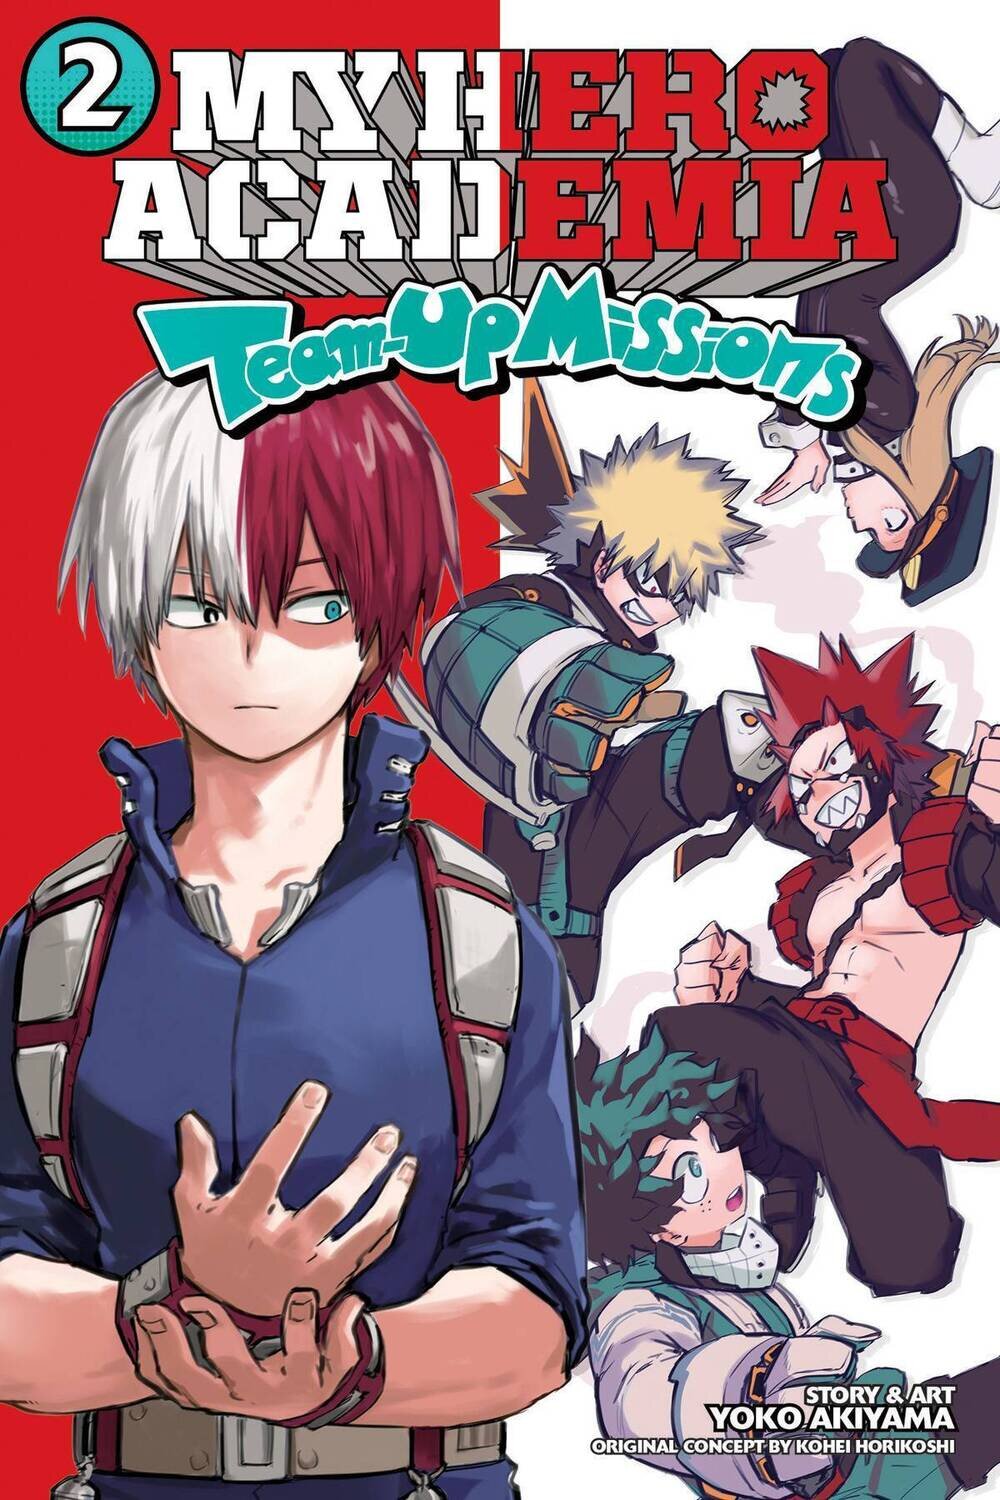 MY HERO ACADEMIA TEAM-UP MISSIONS GN VOL 02